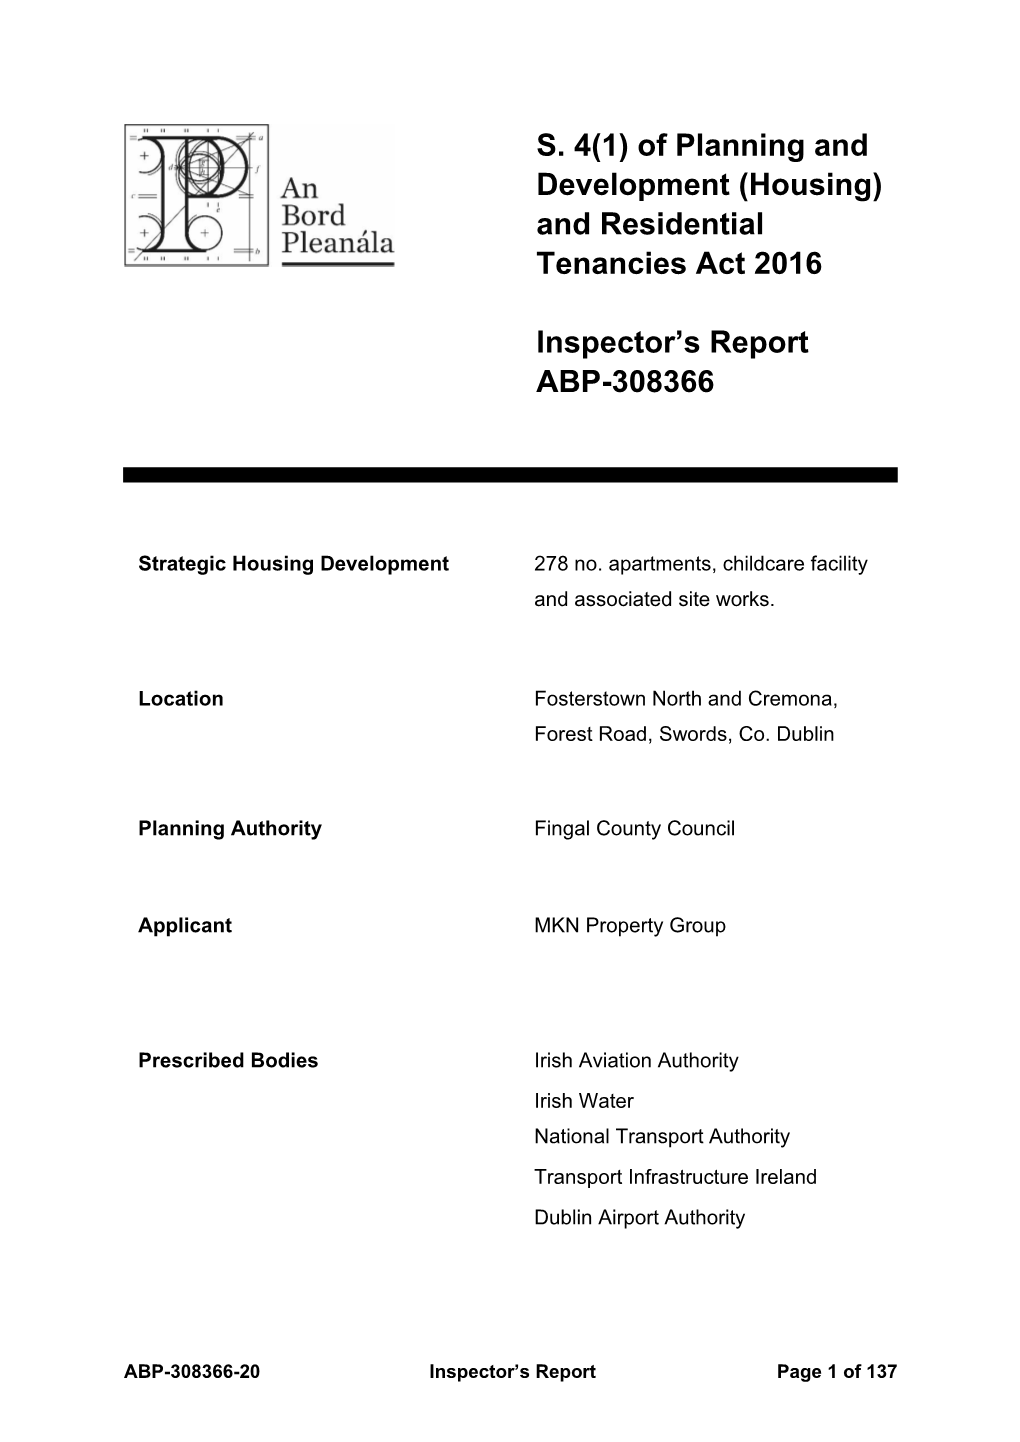 S. 4(1) of Planning and Development (Housing) and Residential Tenancies Act 2016